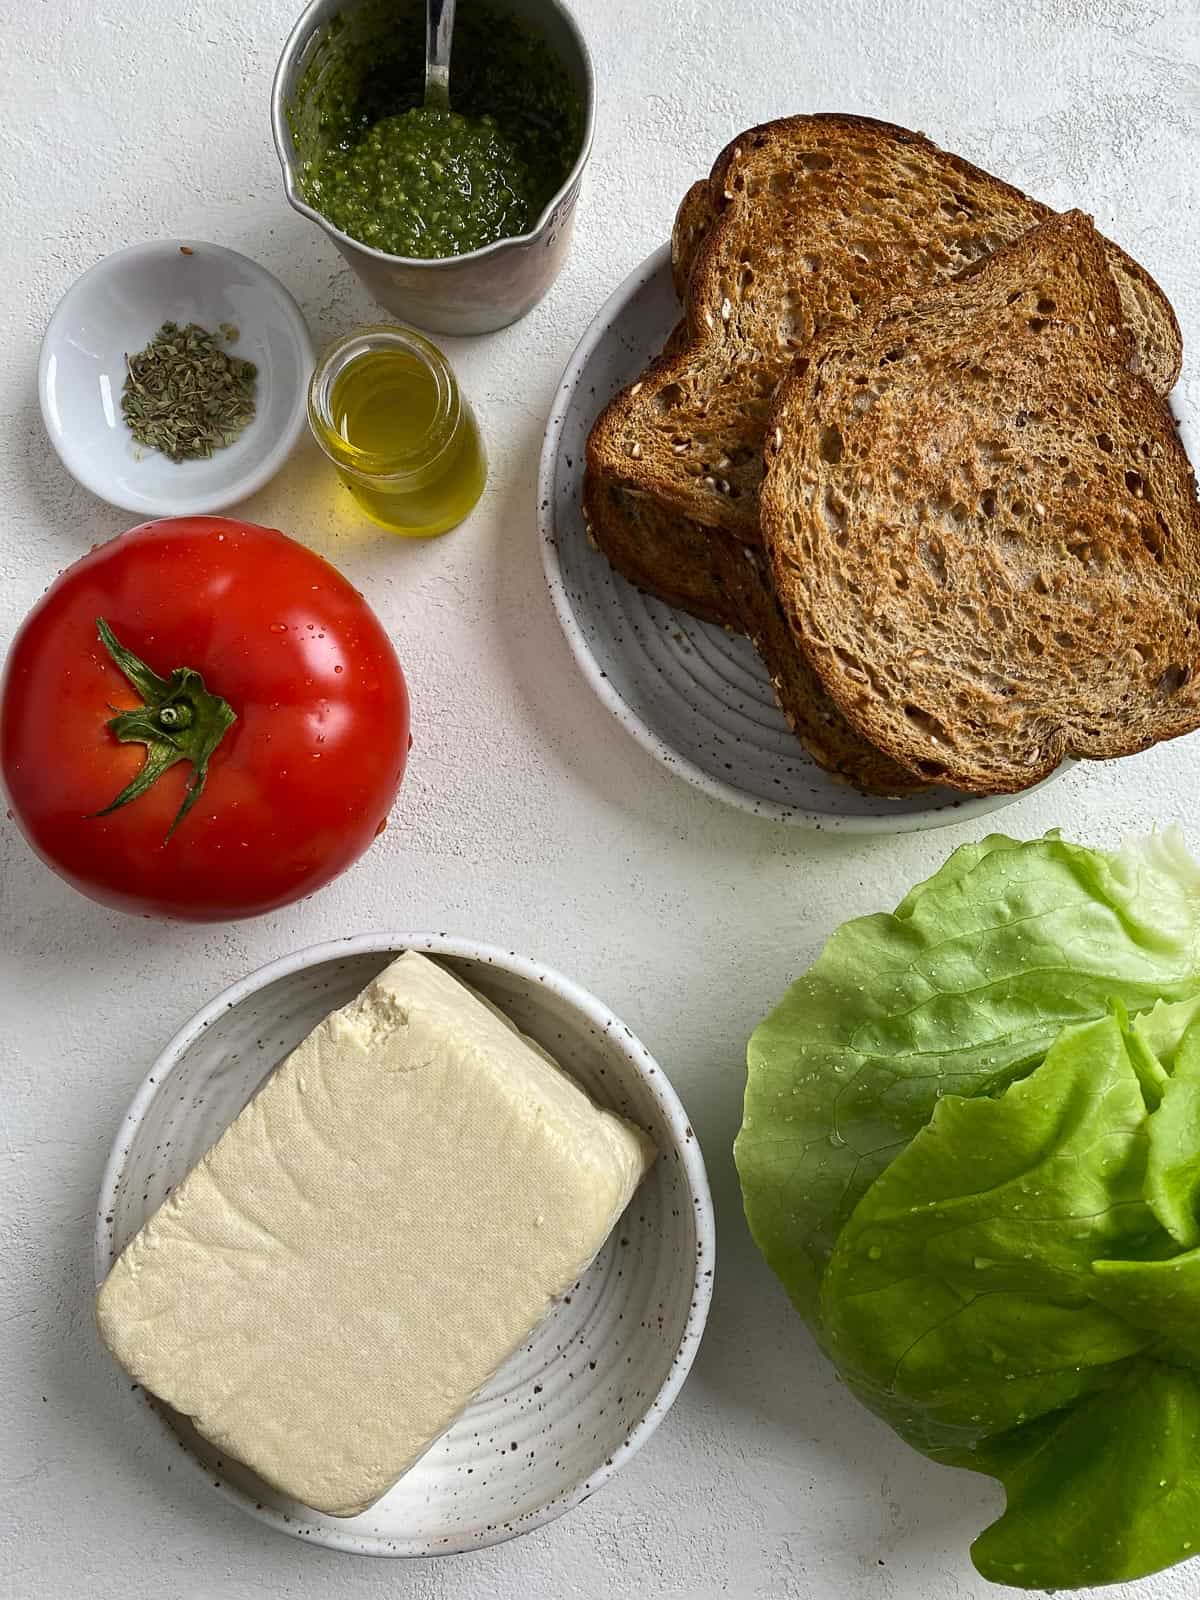 ingredients for Tofu and Pesto Sandwich measured out against a light surface